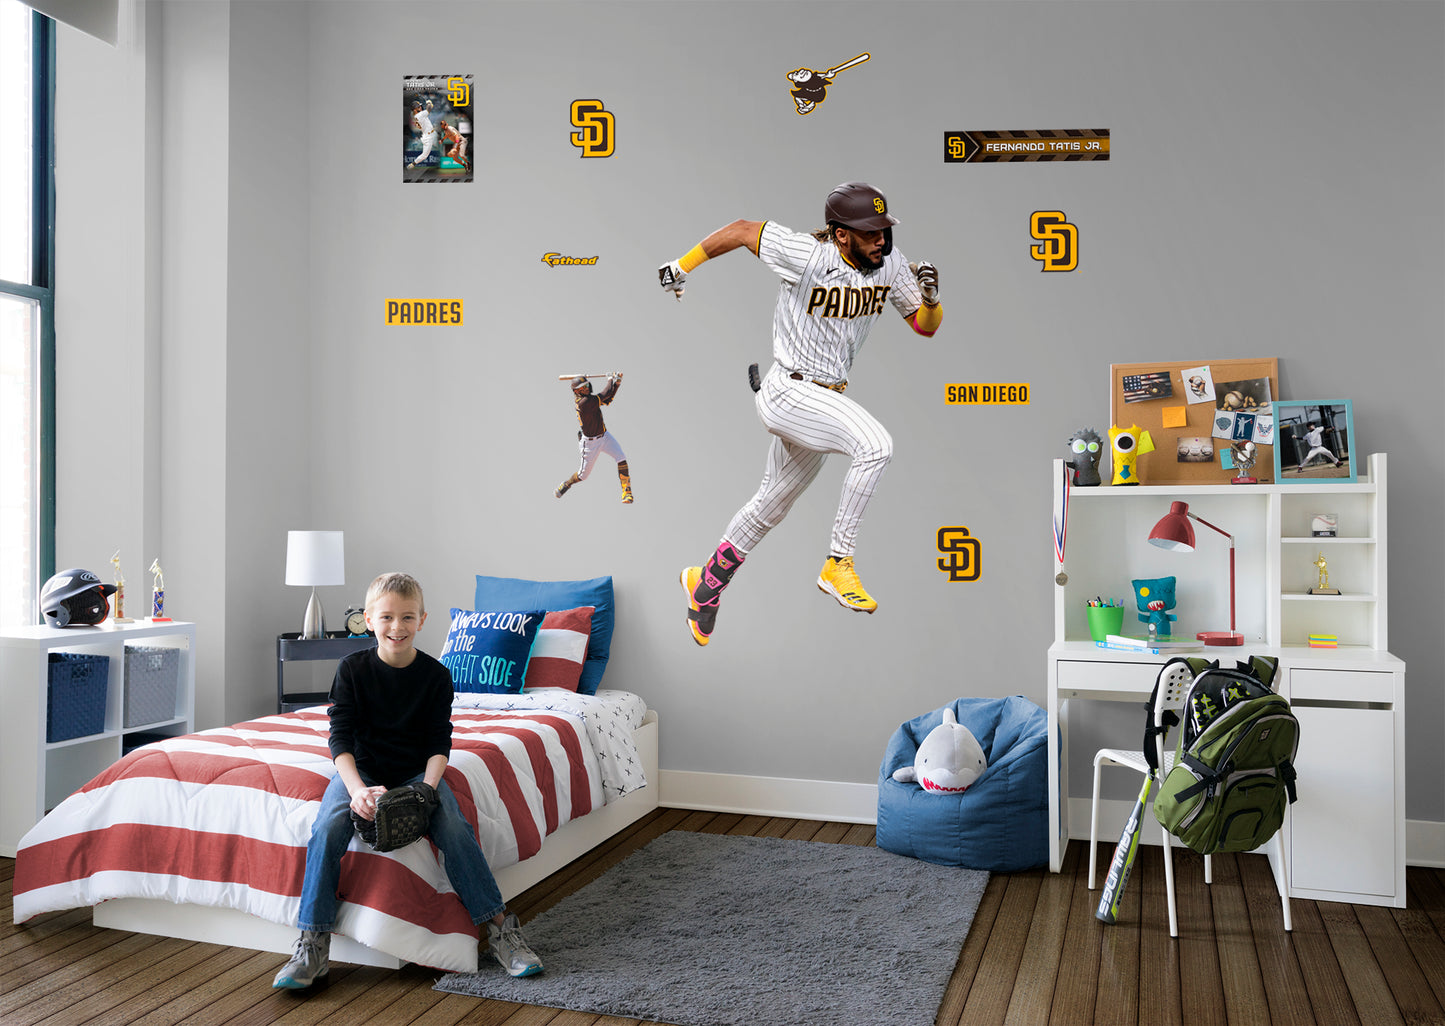 Fernando Tatis Jr for San Diego Padres: RealBig MLB Removable Wall Decal Life-Size Athlete + 2 Wall Decals